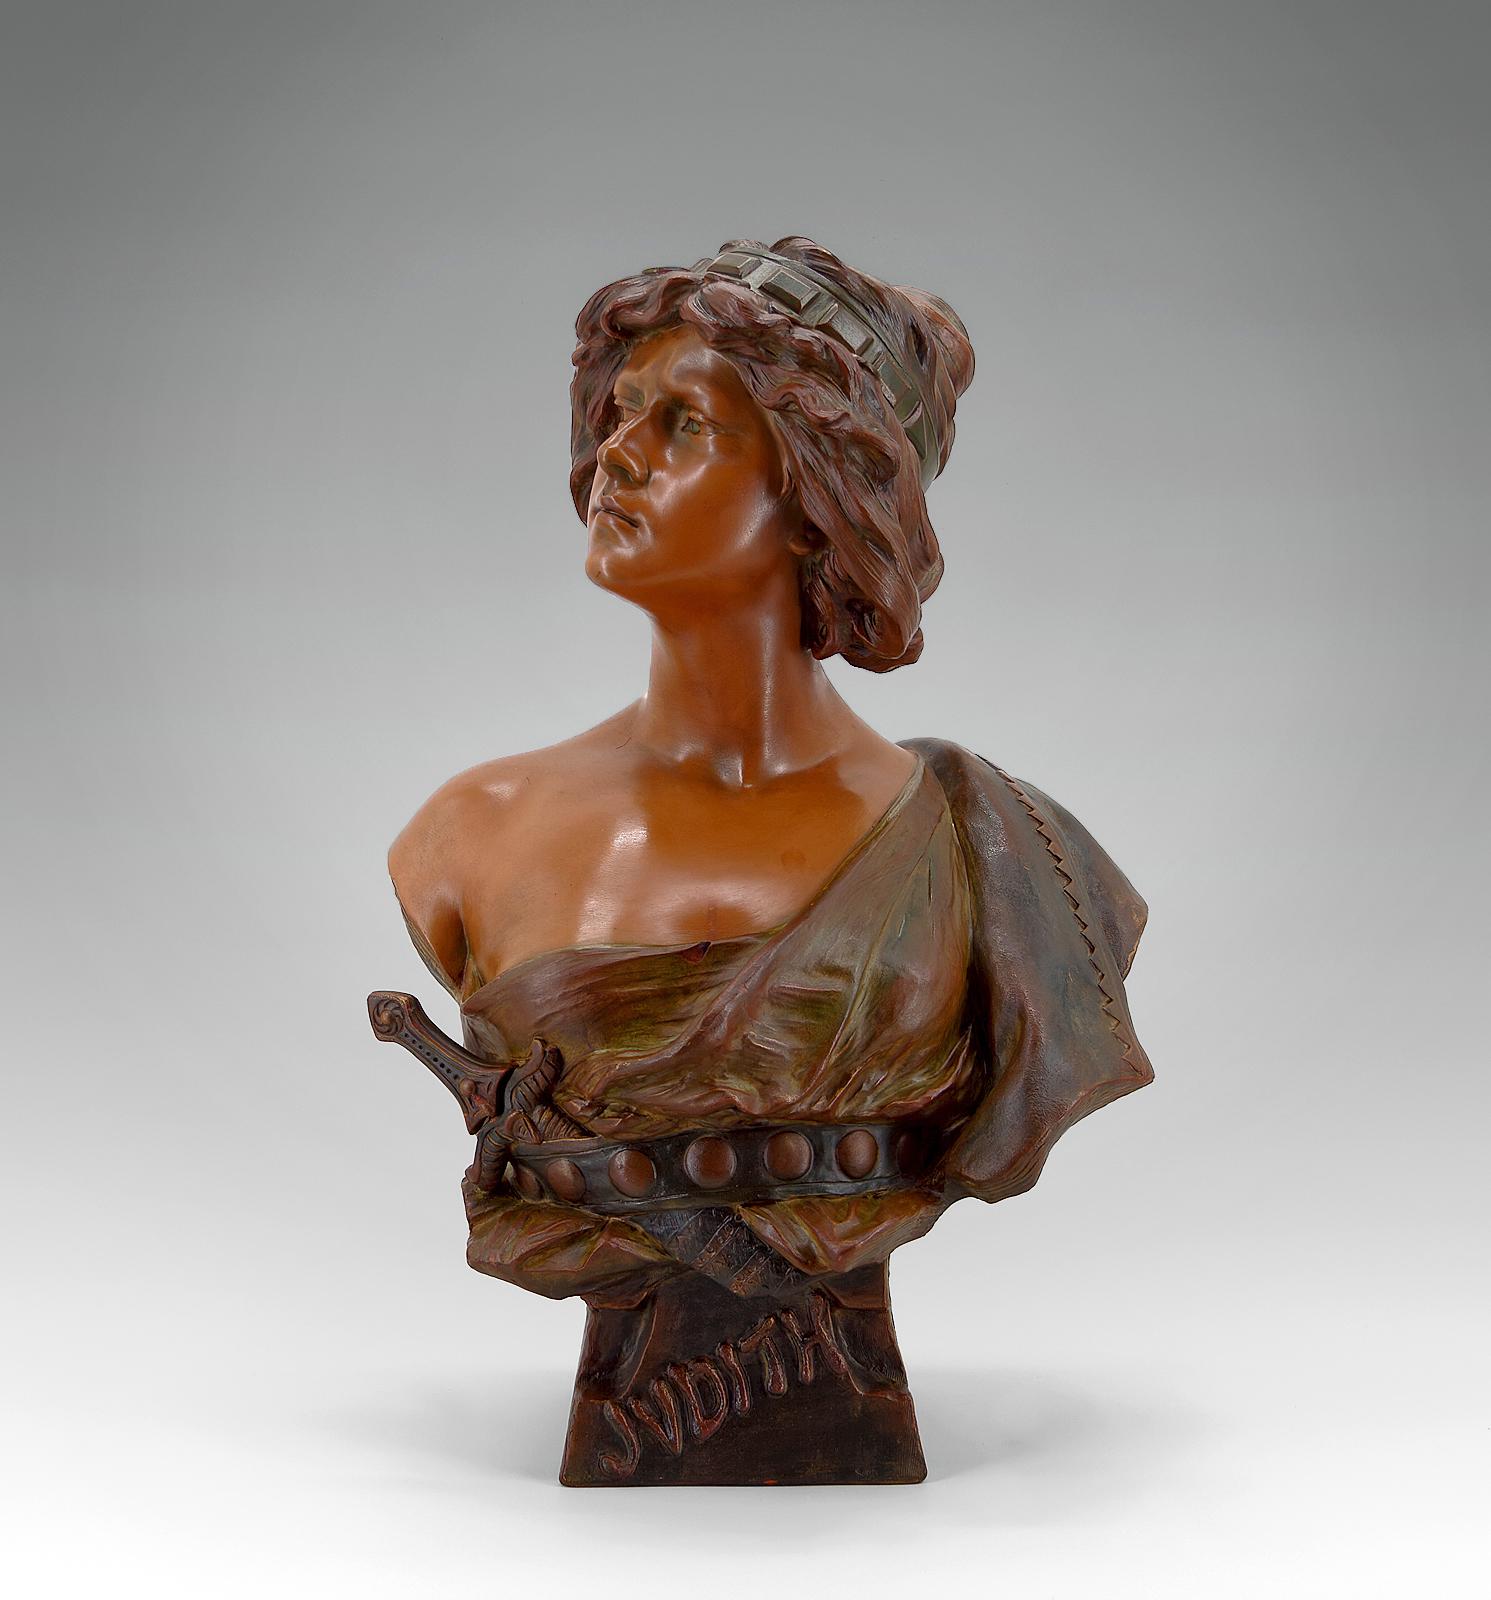 Superb polychrome terracotta bust representing a woman from Antiquity with a proud gaze carrying a dagger. 
Beautiful quality sculpture, whether at the level of the hairstyle, the face, the drape of the clothes and the dagger.
We find the